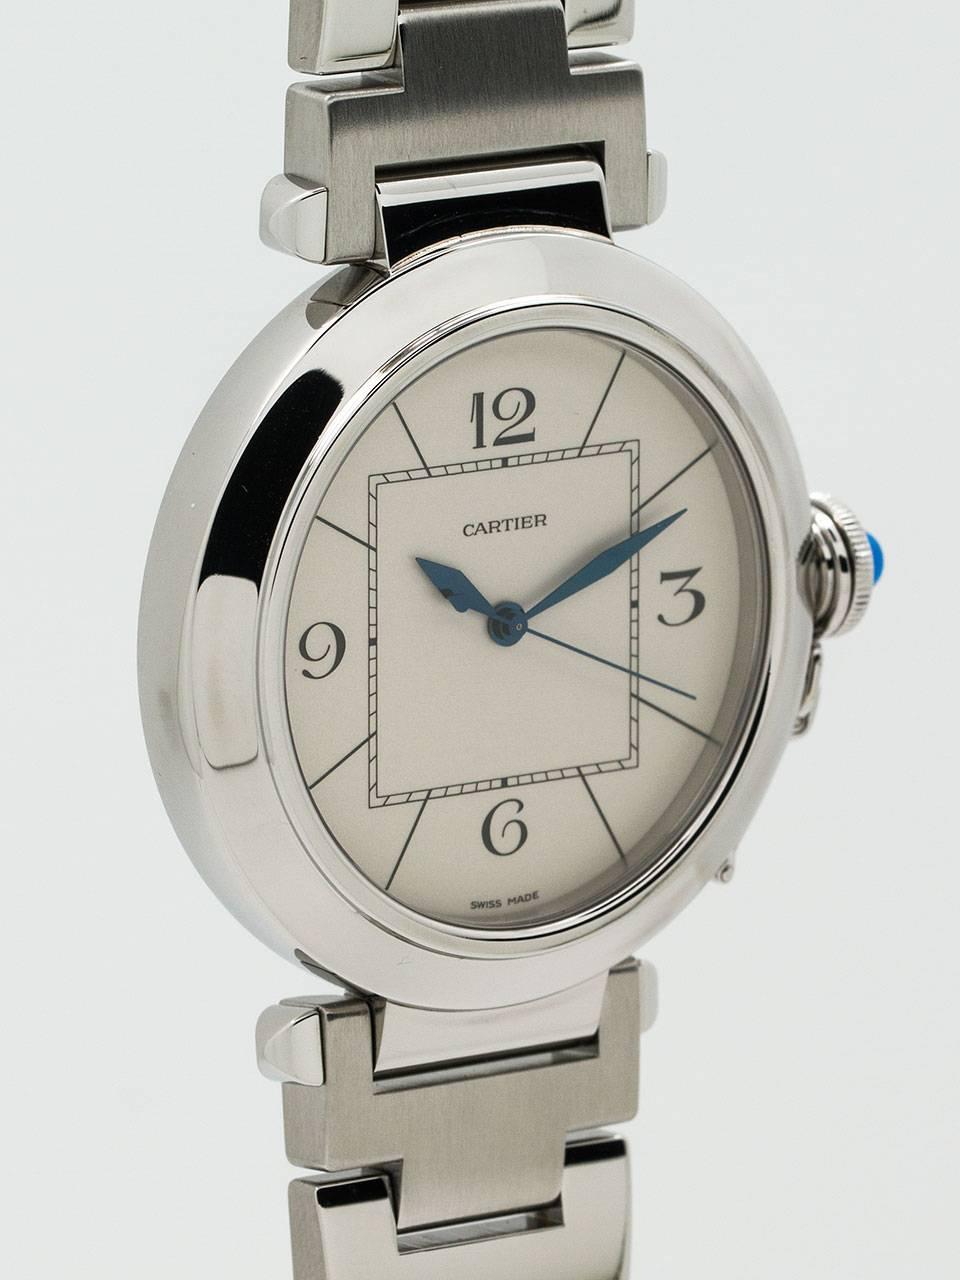 Cartier Stainless Steel Pasha C reference W31072M7 circa 2000s. Oversize 42mm case with wide smooth bezel and sapphire crystal. Antique silver grained dial with blued steel kite shaped hands and oversize sweep seconds. With cabochon sapphire capped